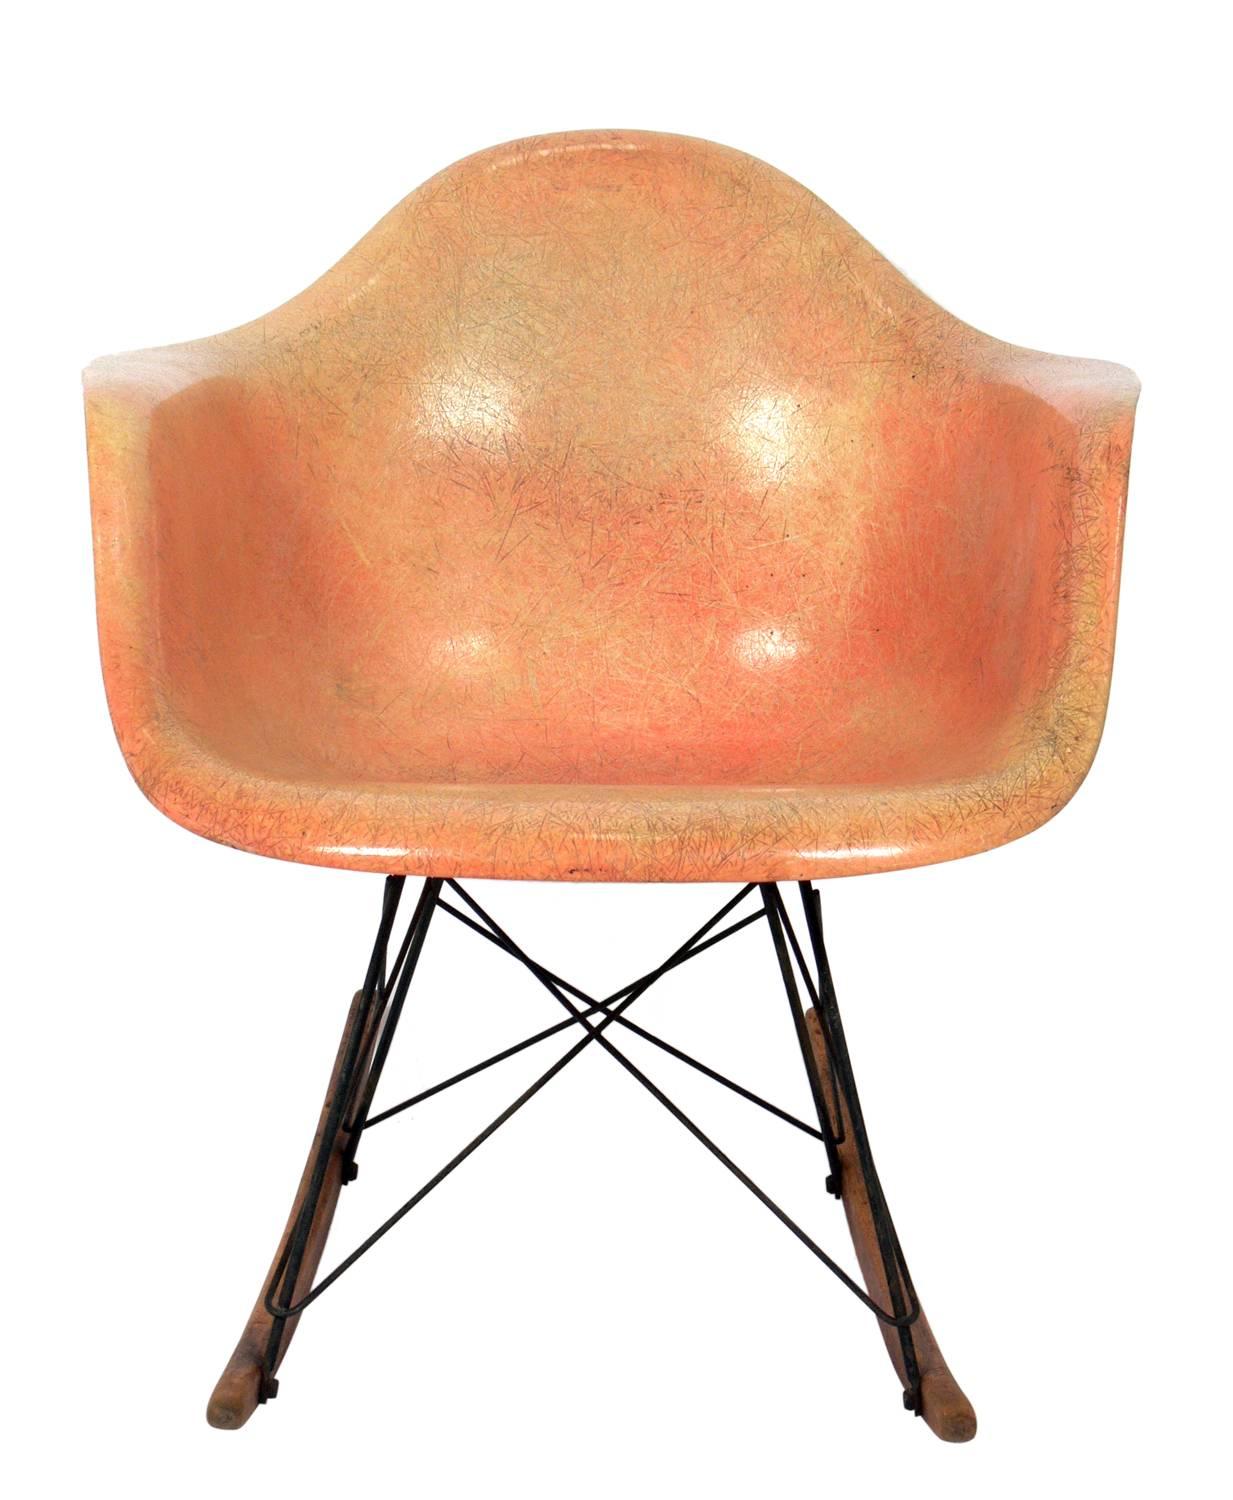 Early all original rope edge rocker, designed by Charles Eames for Zenith Products, pre Herman Miller production, circa early 1950s. If you're a purest looking for an all original Eames rocker straight out of the estate of it's original owner, this